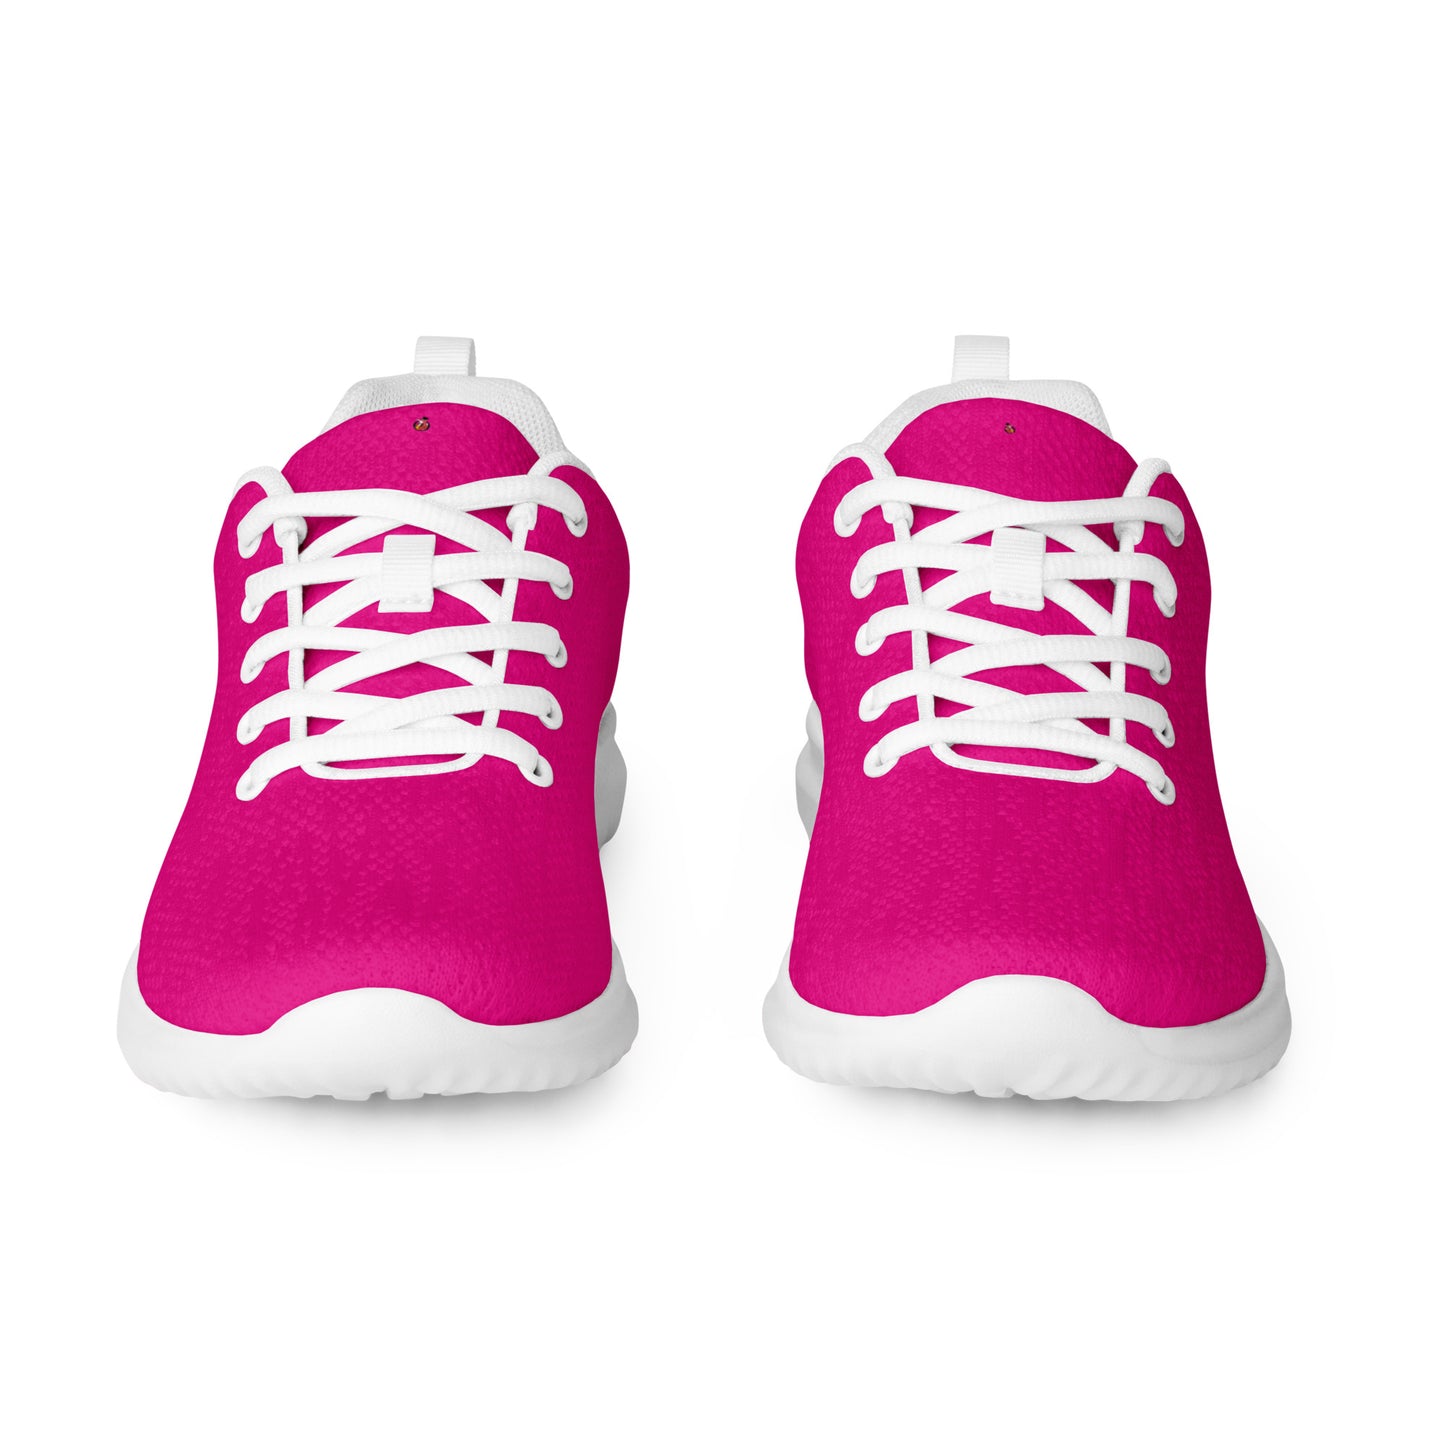 Women’s Athletic Shoes - Mexico Pink